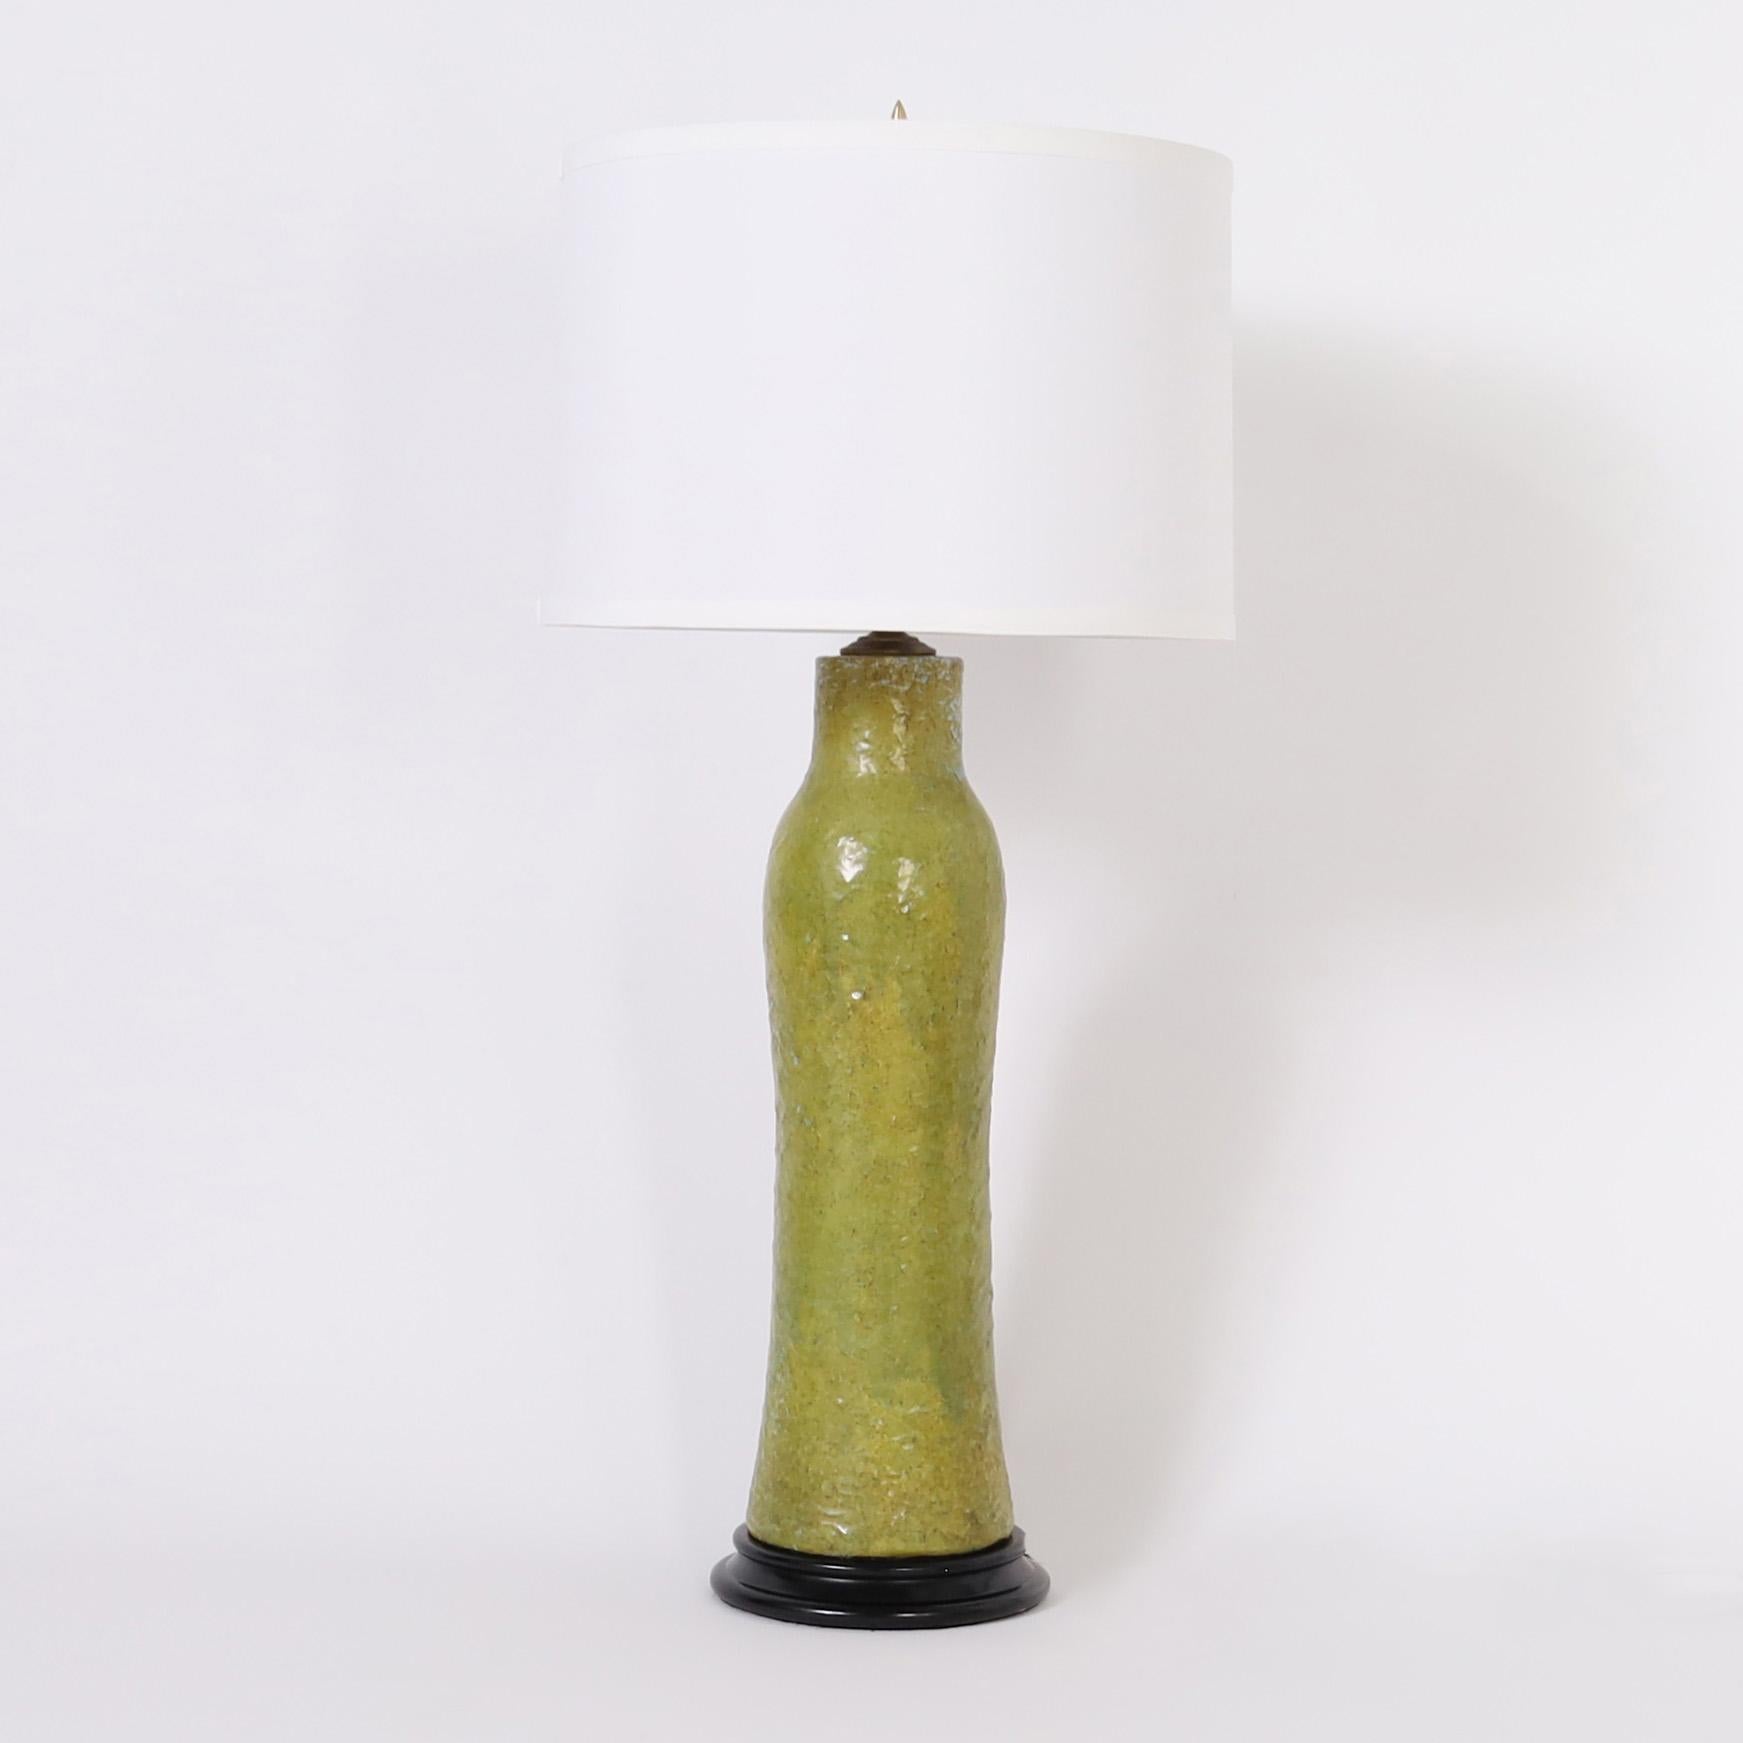 Chic pair of vintage table lamps crafted in terra cotta in a sophisticated sculptural form with a thick granular green glaze. Presented on turned wood bases.